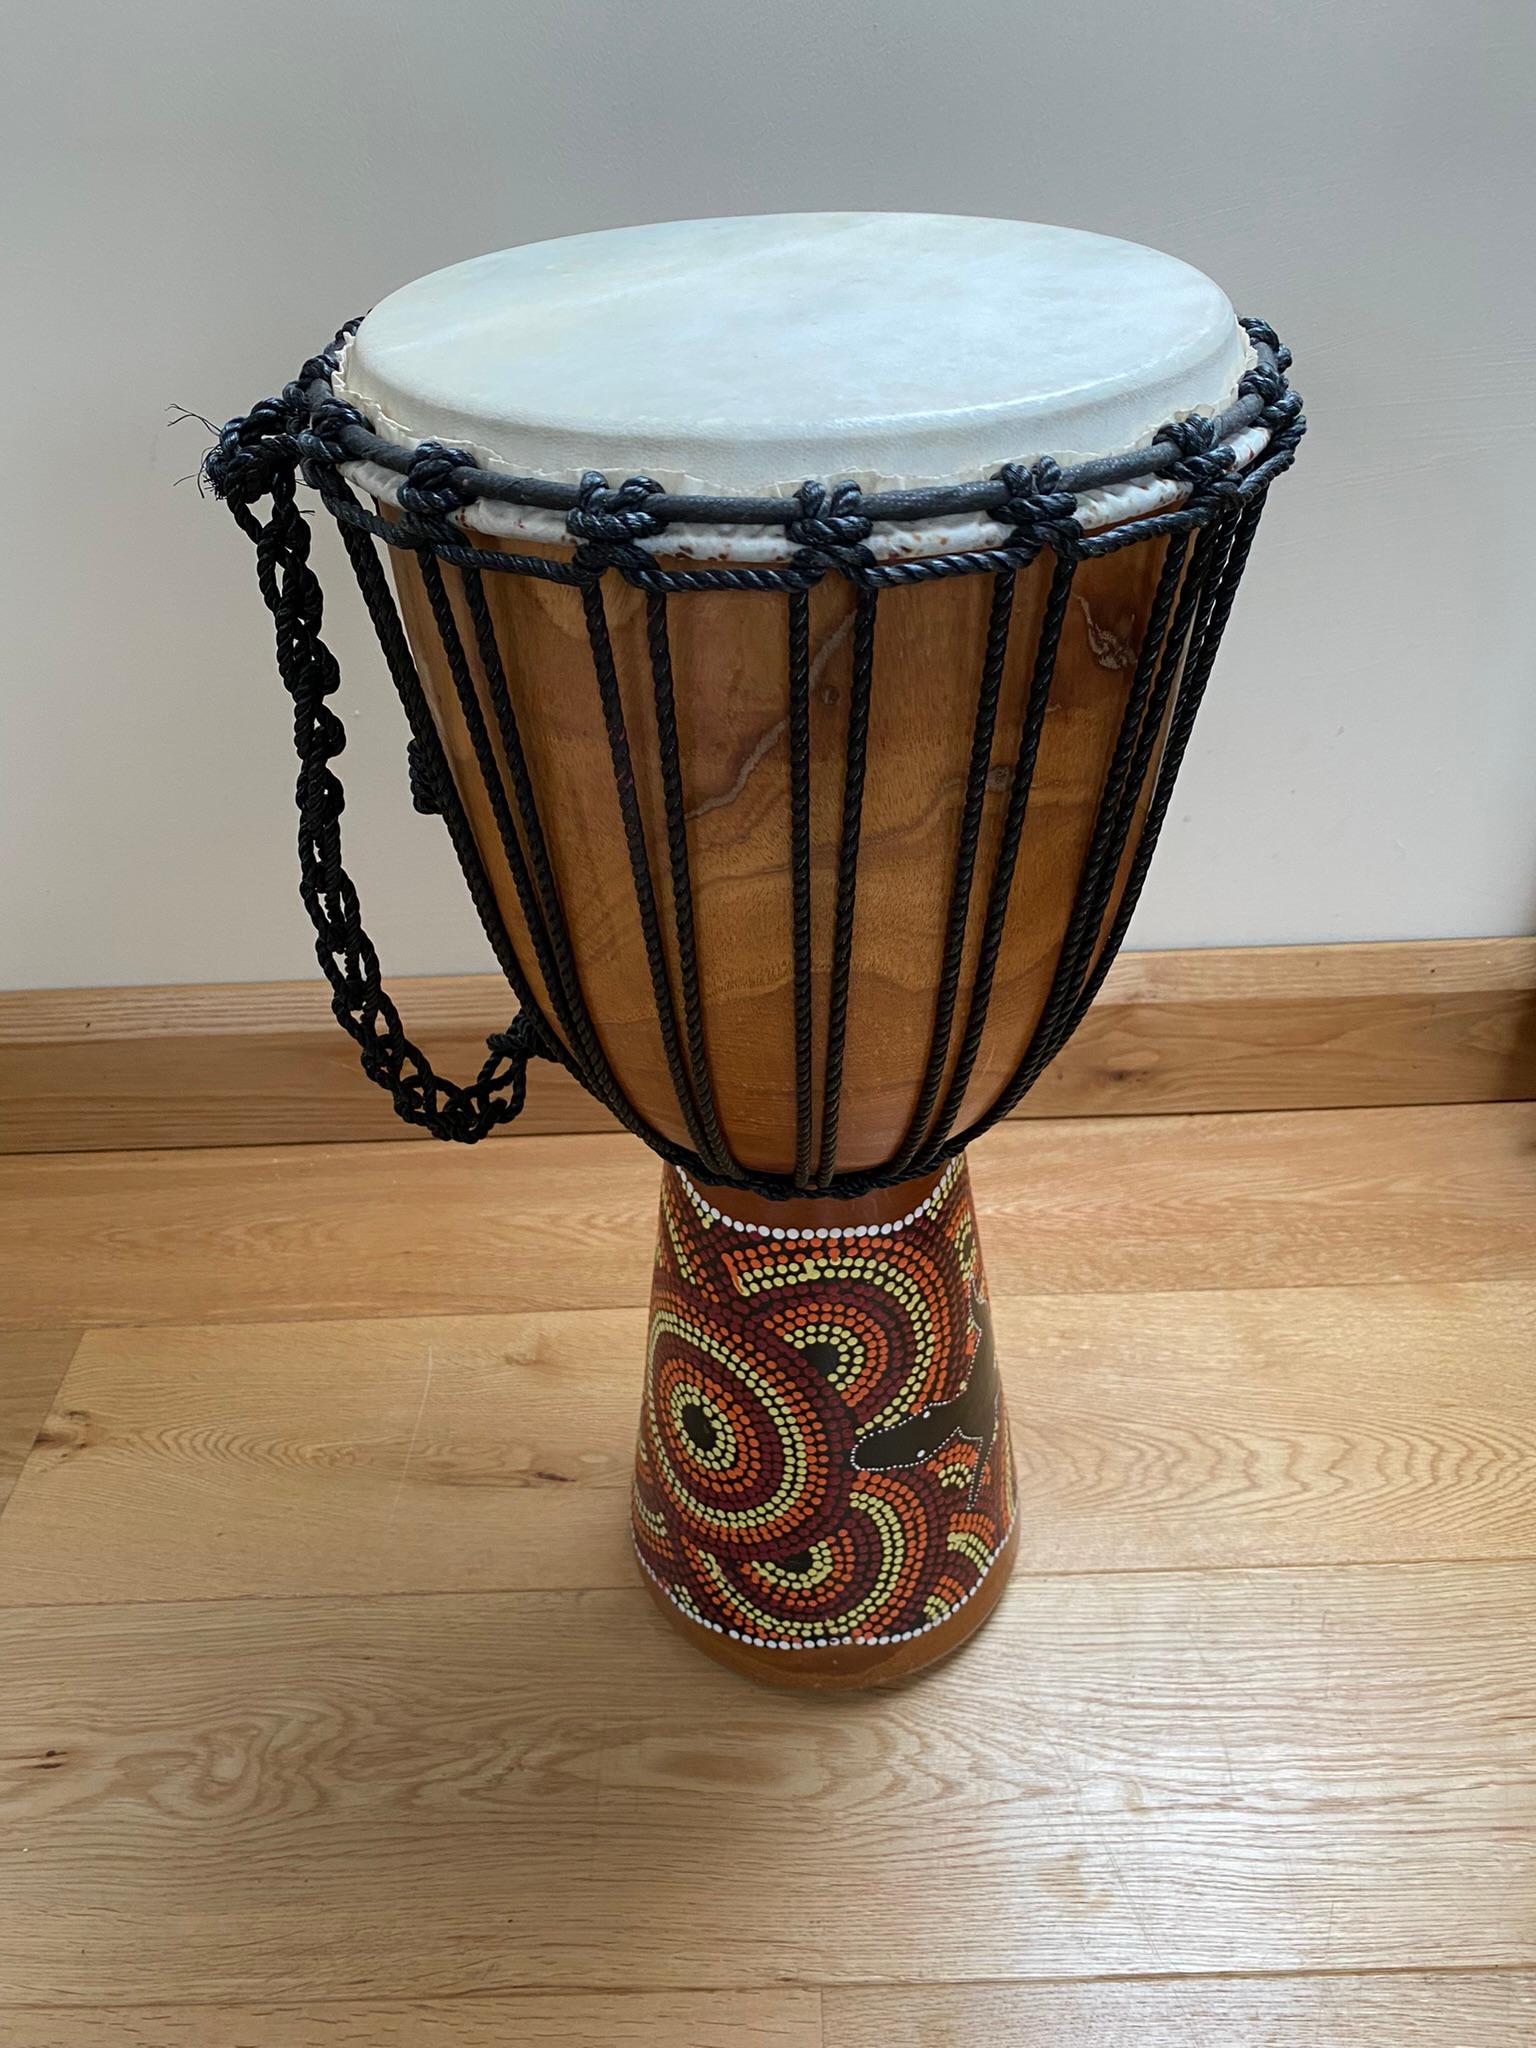 A superb vintage Bongo Drum, lovely decorative piece with beautiful wood construction and hand-painted with a vibrant tribal colourway.  Lovely wear and colour to the wood.

In Excellent original condition, makes a good sound.